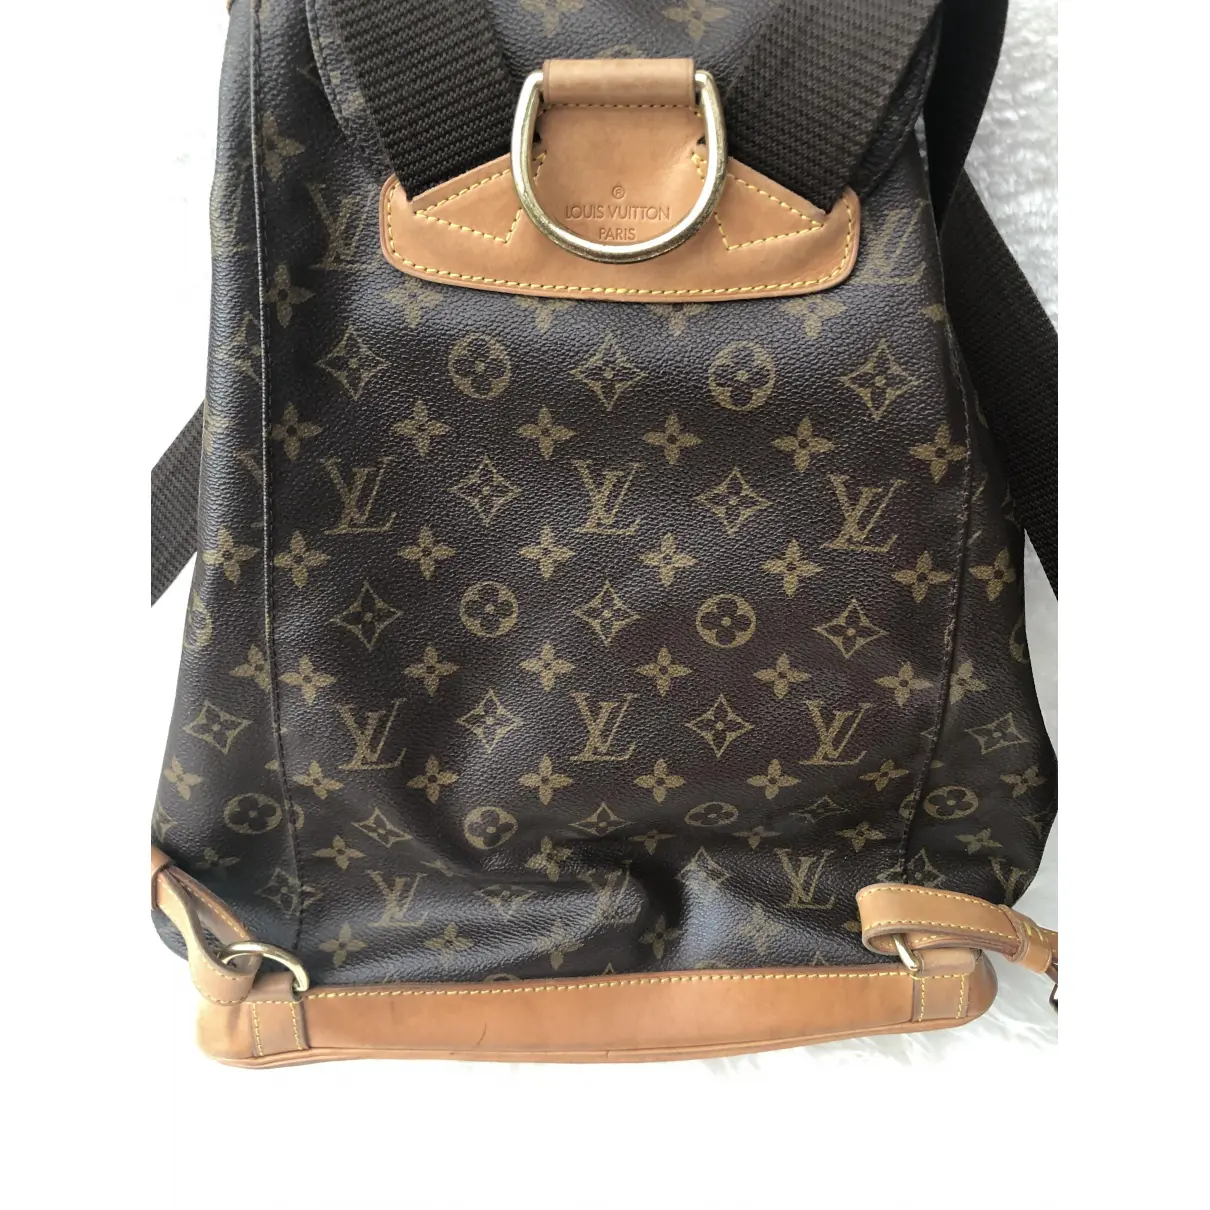 Buy Louis Vuitton Montsouris leather backpack online